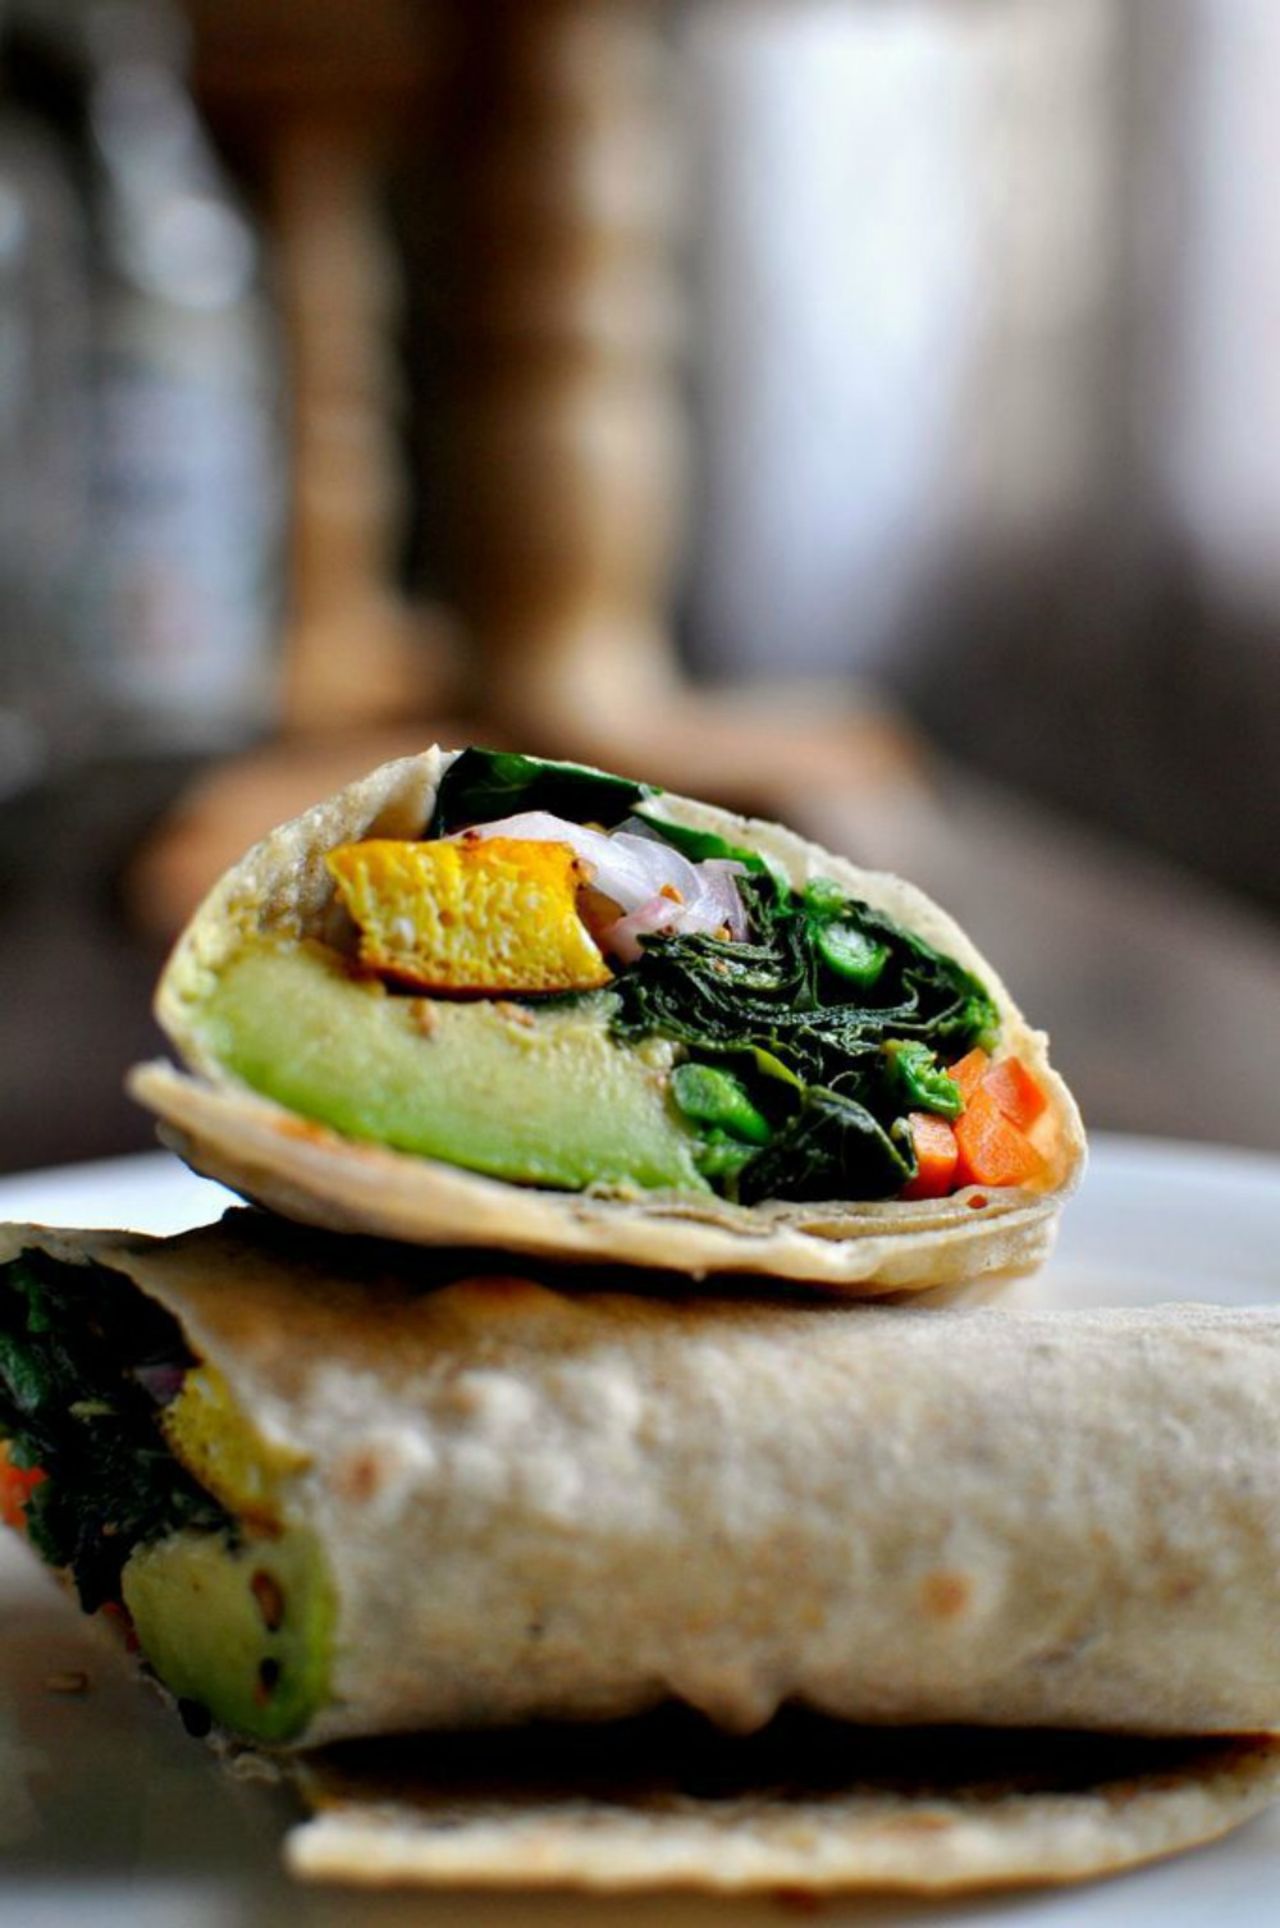 So while predictions may look dire, Haddad says the future could look brighter, if policymakers take action and people begin to reach for healthier options. "It's not fate or destiny. There are choices." <br /><br />Pictured here, a Rolex, which is a popular dish in Uganda made from a rolled chapatti containing a fried egg and some vegetables, is wildly popular in Uganda, but little known outside the country. 